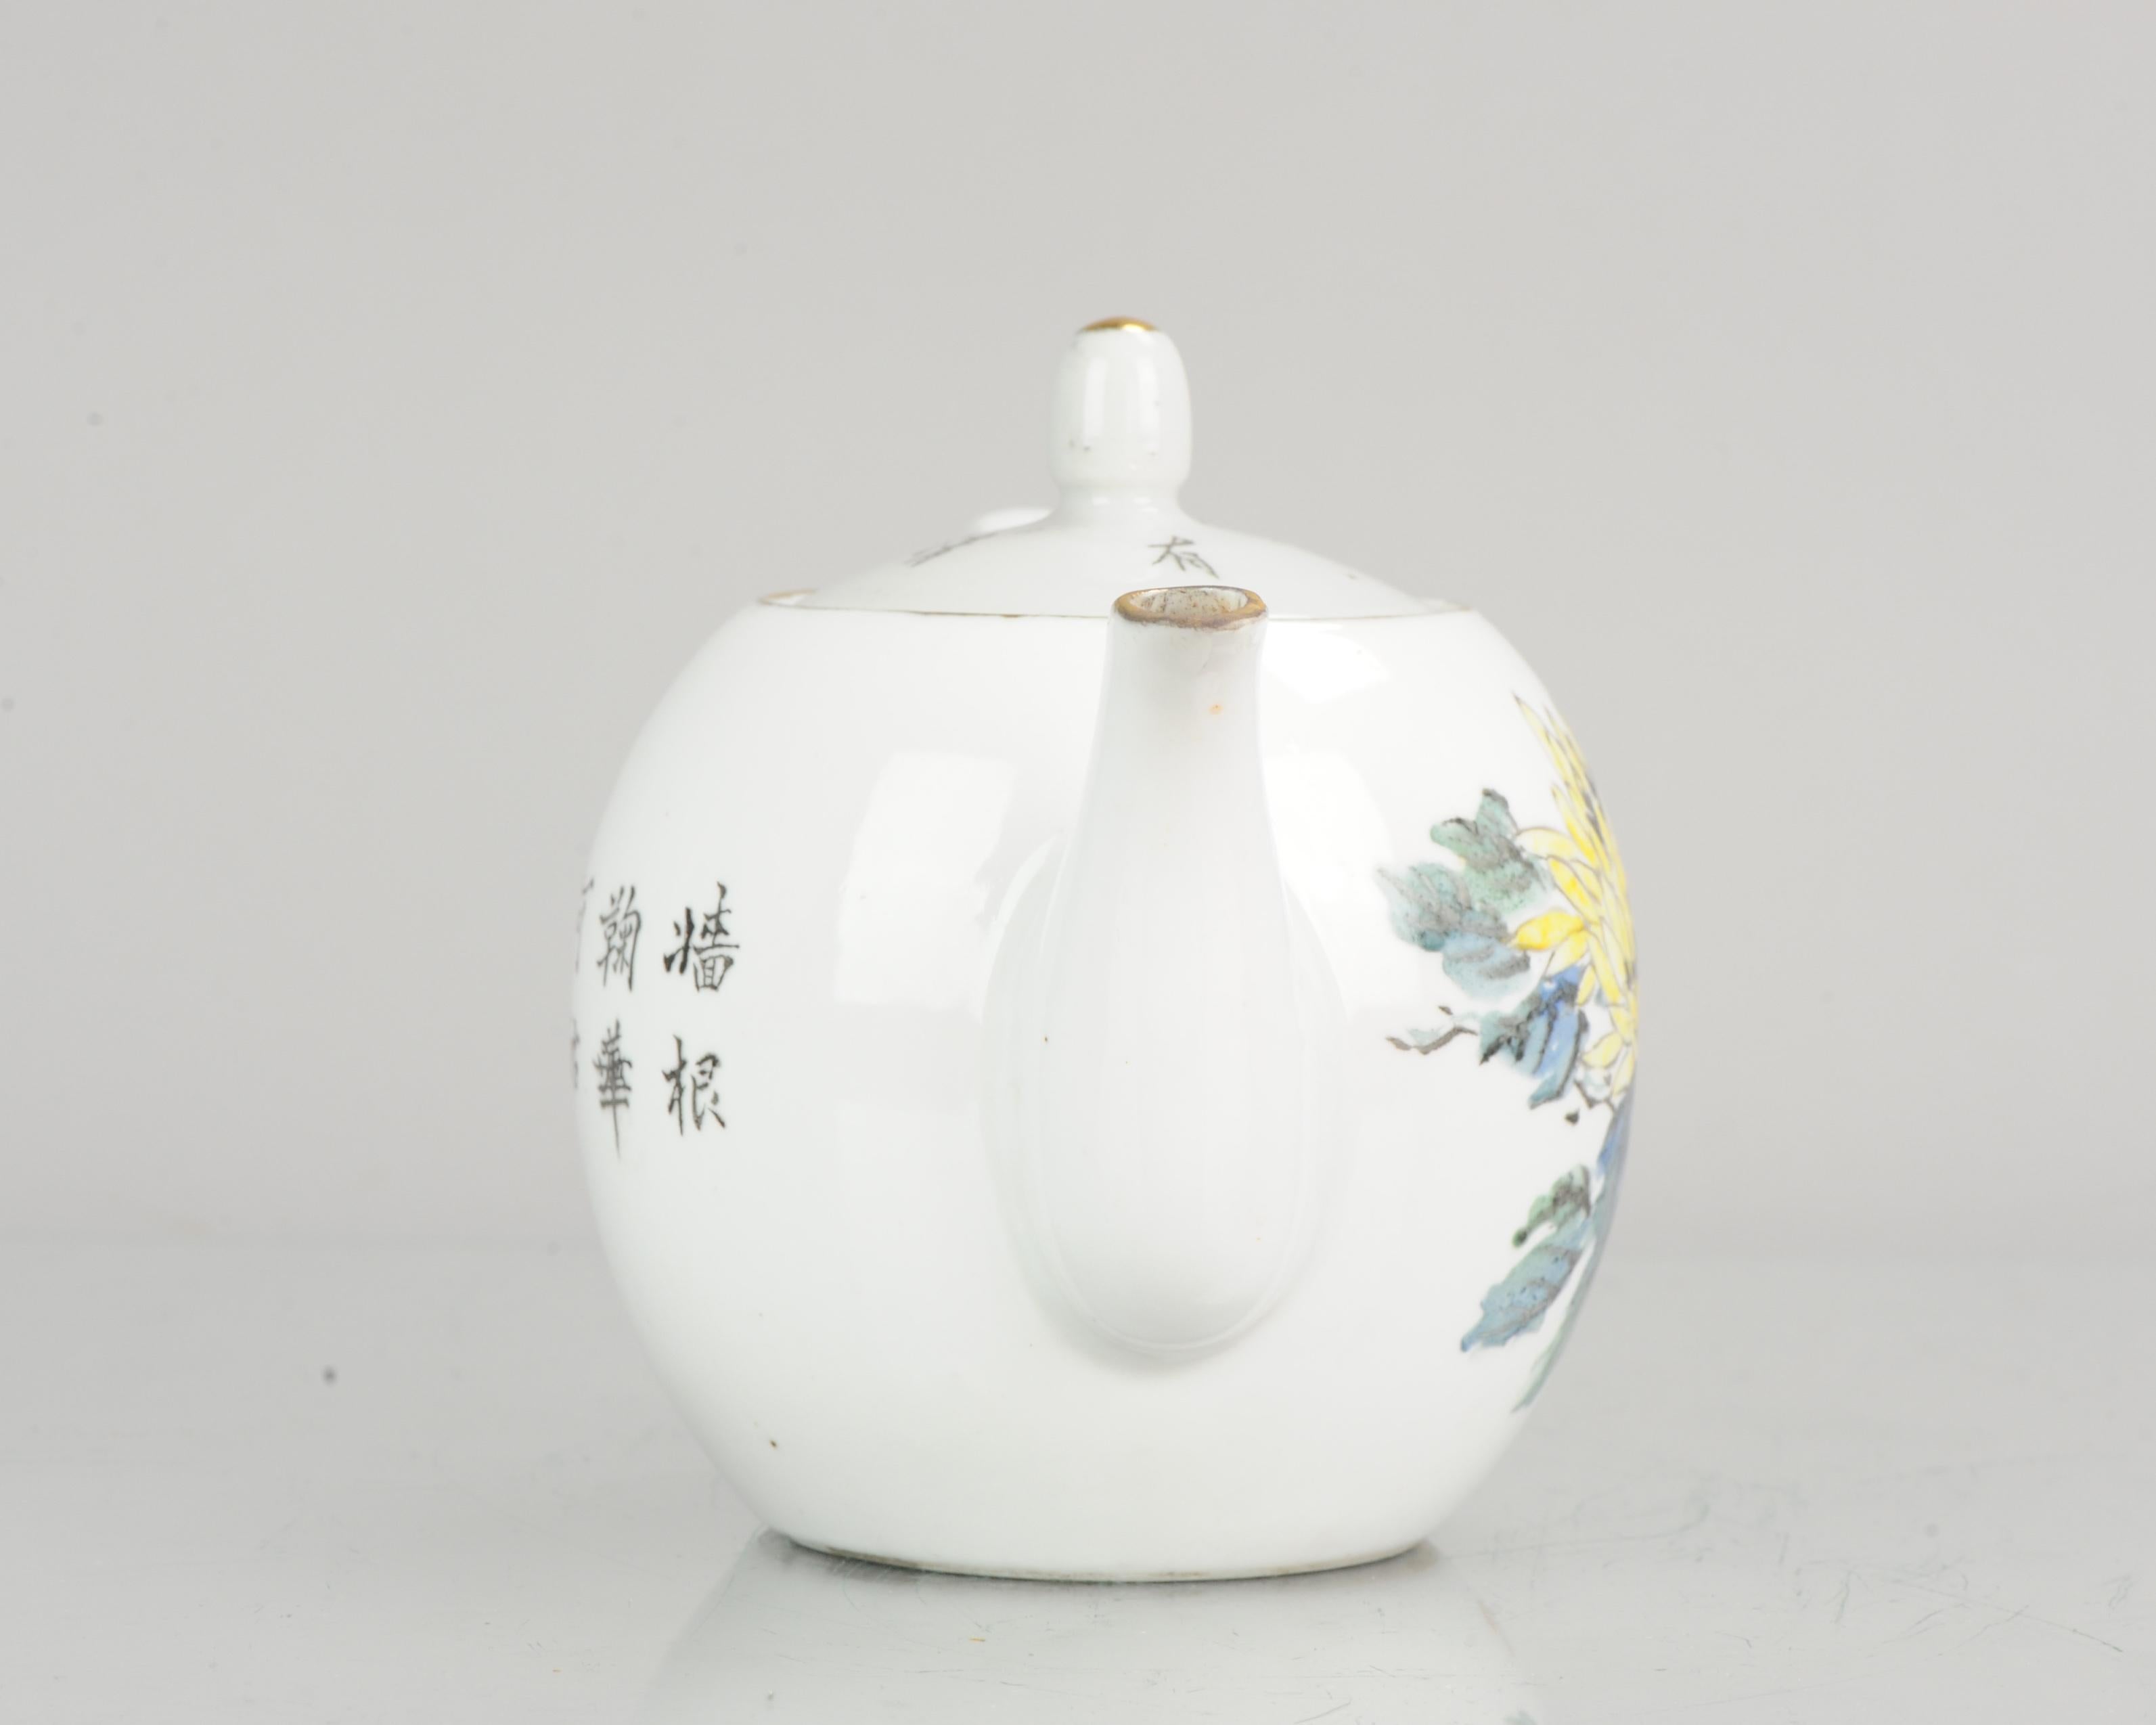 Porcelain Art Fencai Teapot with Flowers & Poem Porcelain Chinese, 1980/1990 In Good Condition For Sale In Amsterdam, Noord Holland